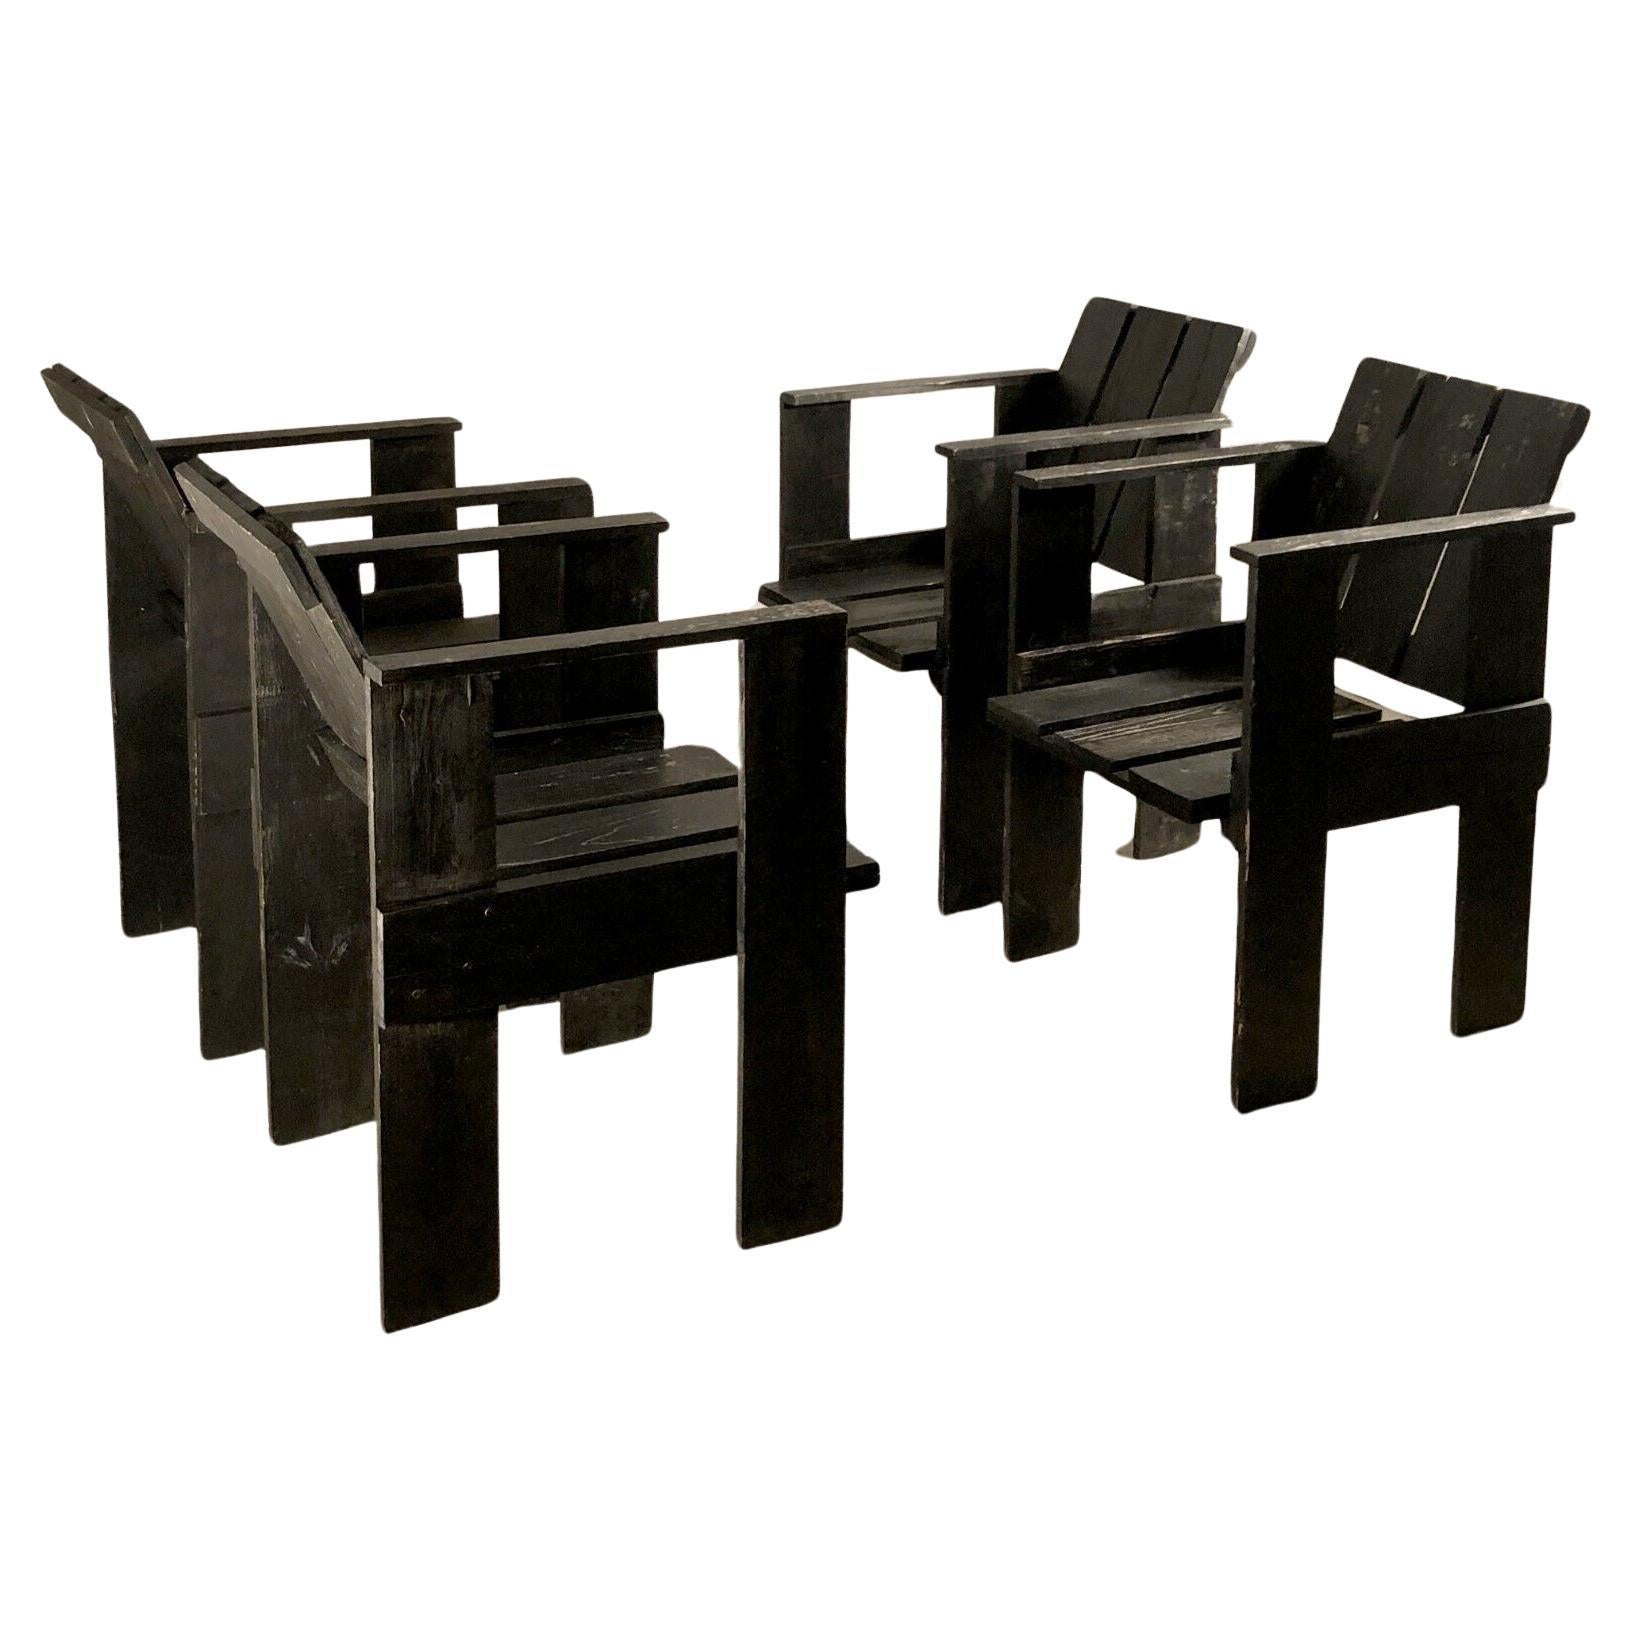 A Set Of 4 MODERNIST CUBIST "CRATE" CHAIRS after GERRIT RIETVELD, Holland  1980 For Sale